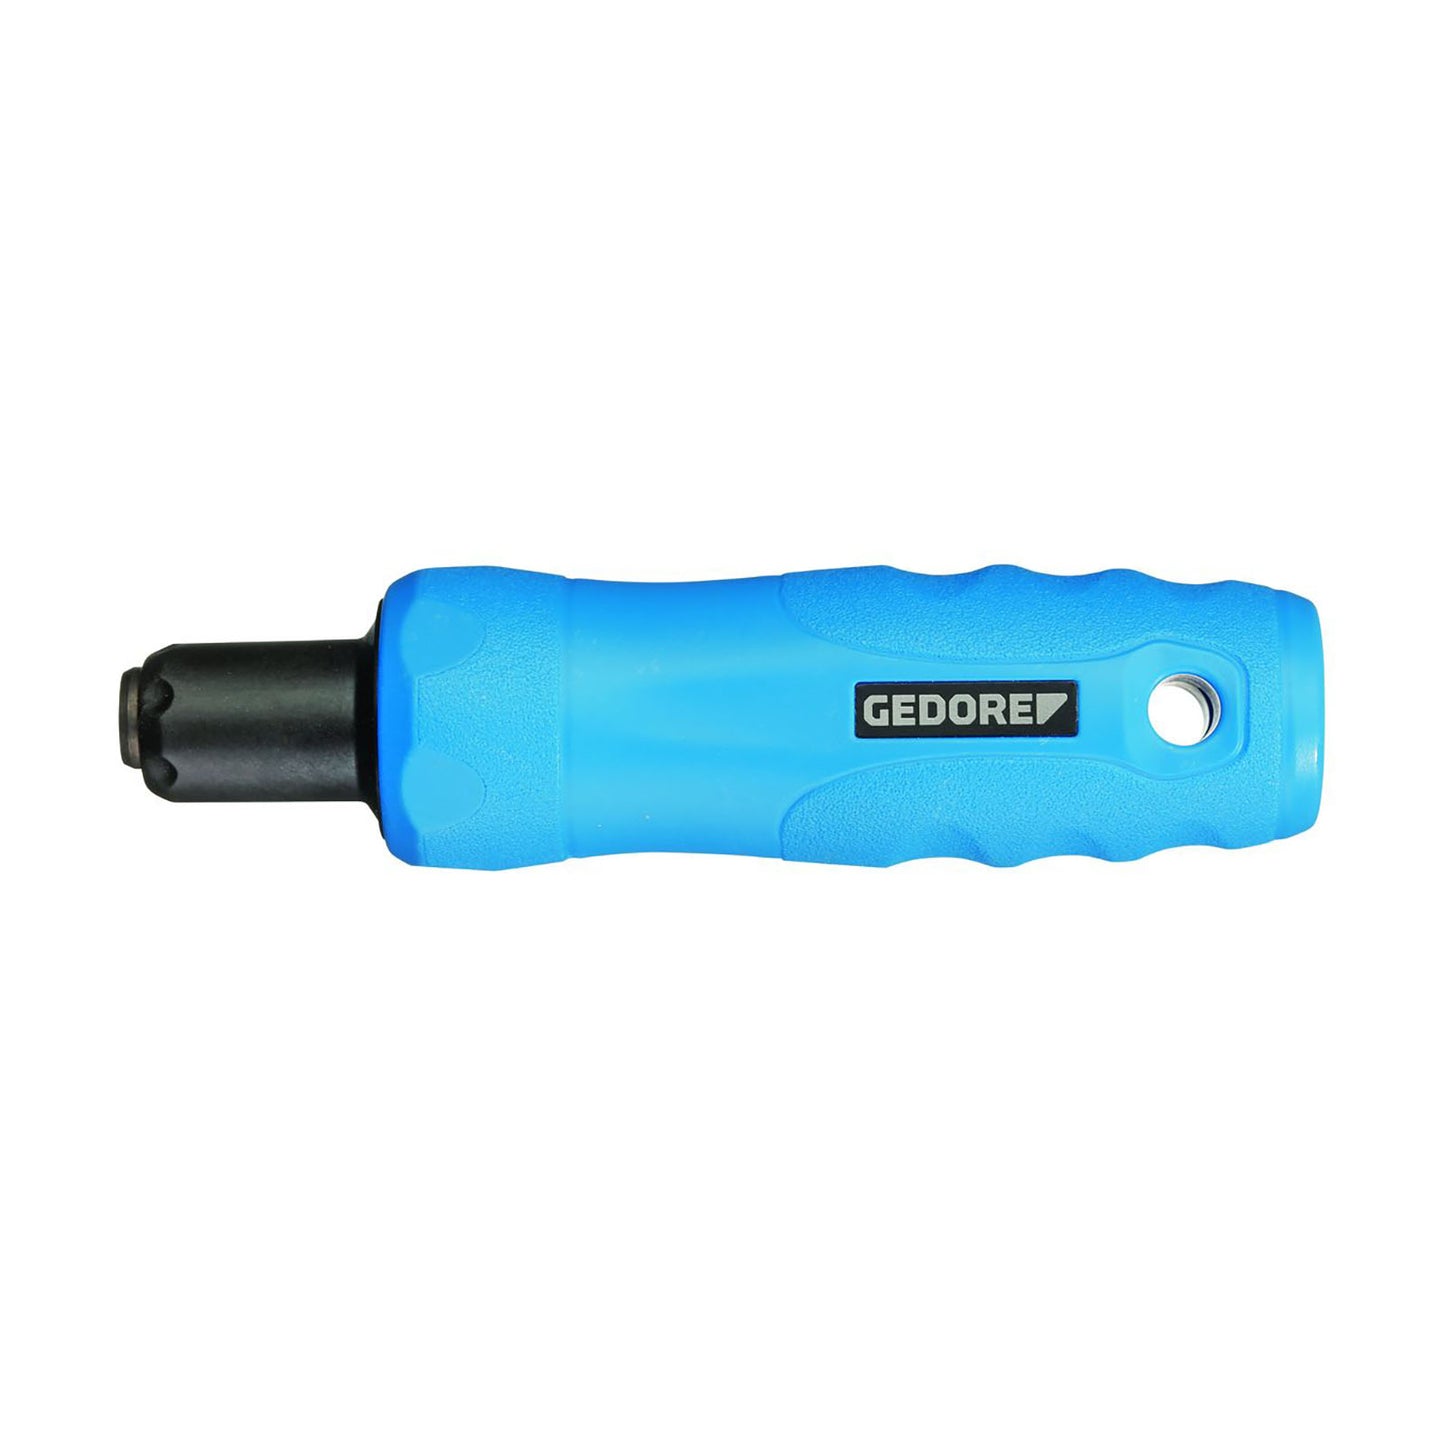 GEDORE PRIME 450 FH - PGNS Screwdriver 0.5-4.5 Nm (2927748)